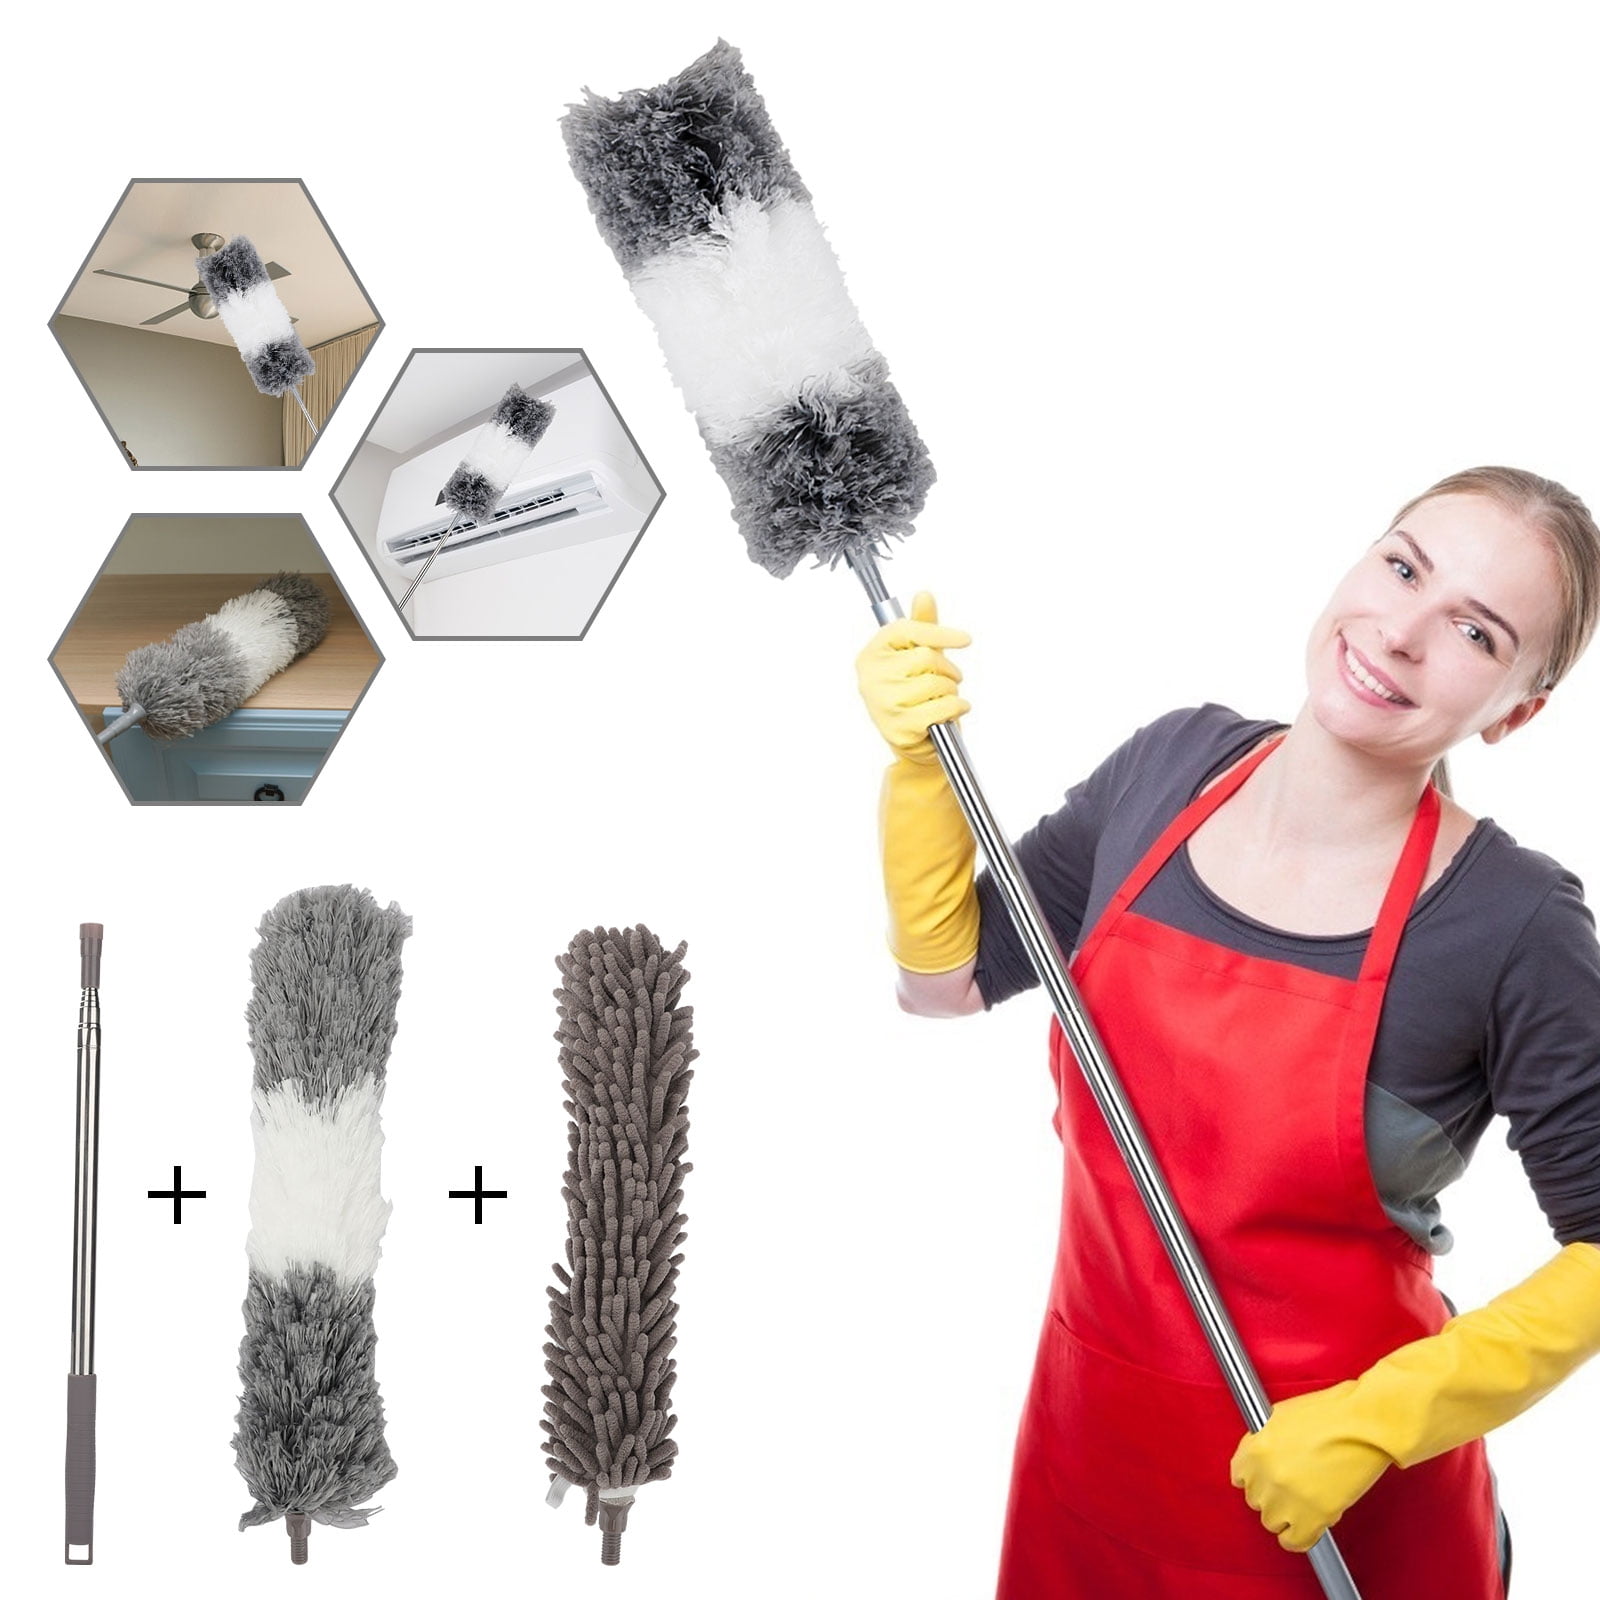 Baseboards and Cars Blinds Radiators Long Handled Flexible Duster for Cleaning Cobwebs Lights Activave Extendable Feather Duster Telescopic with Microfiber Head High Ceiling Fan Blue